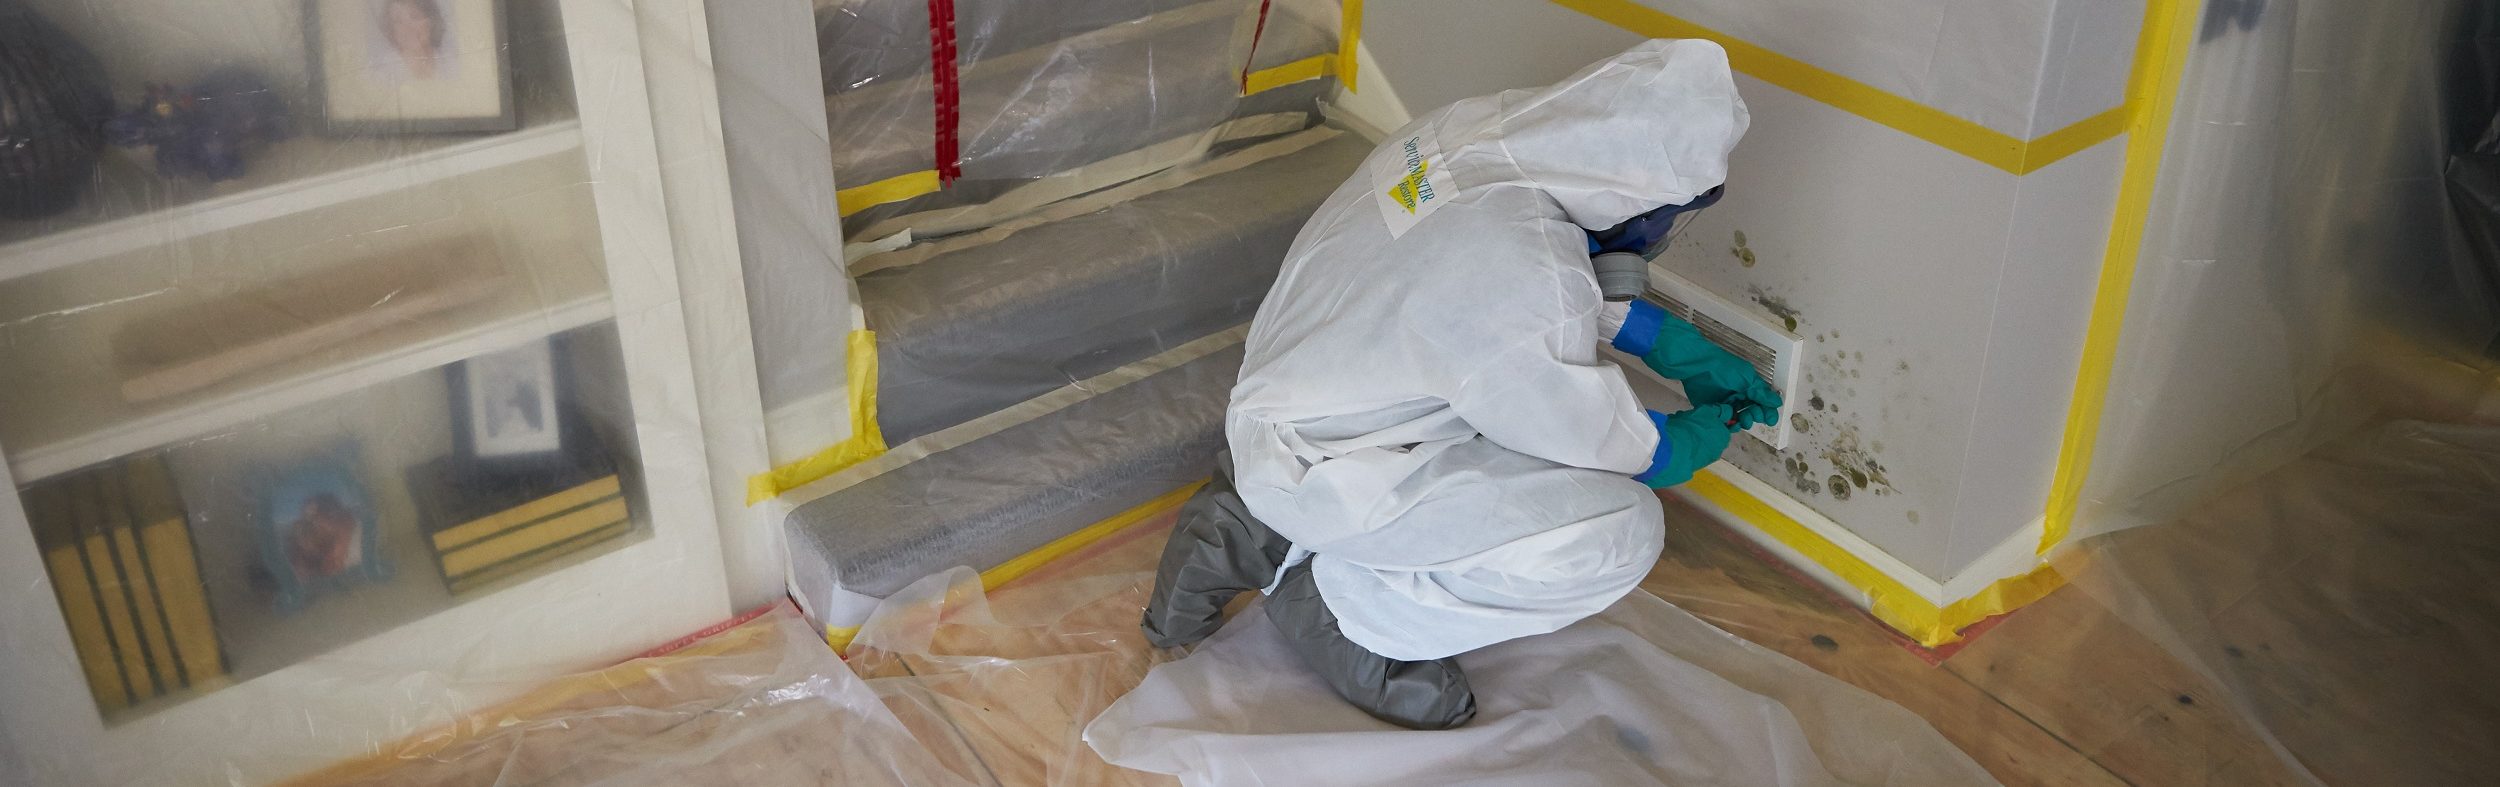 Mold remediation, mold abatement, mold restoration services for your home  or business